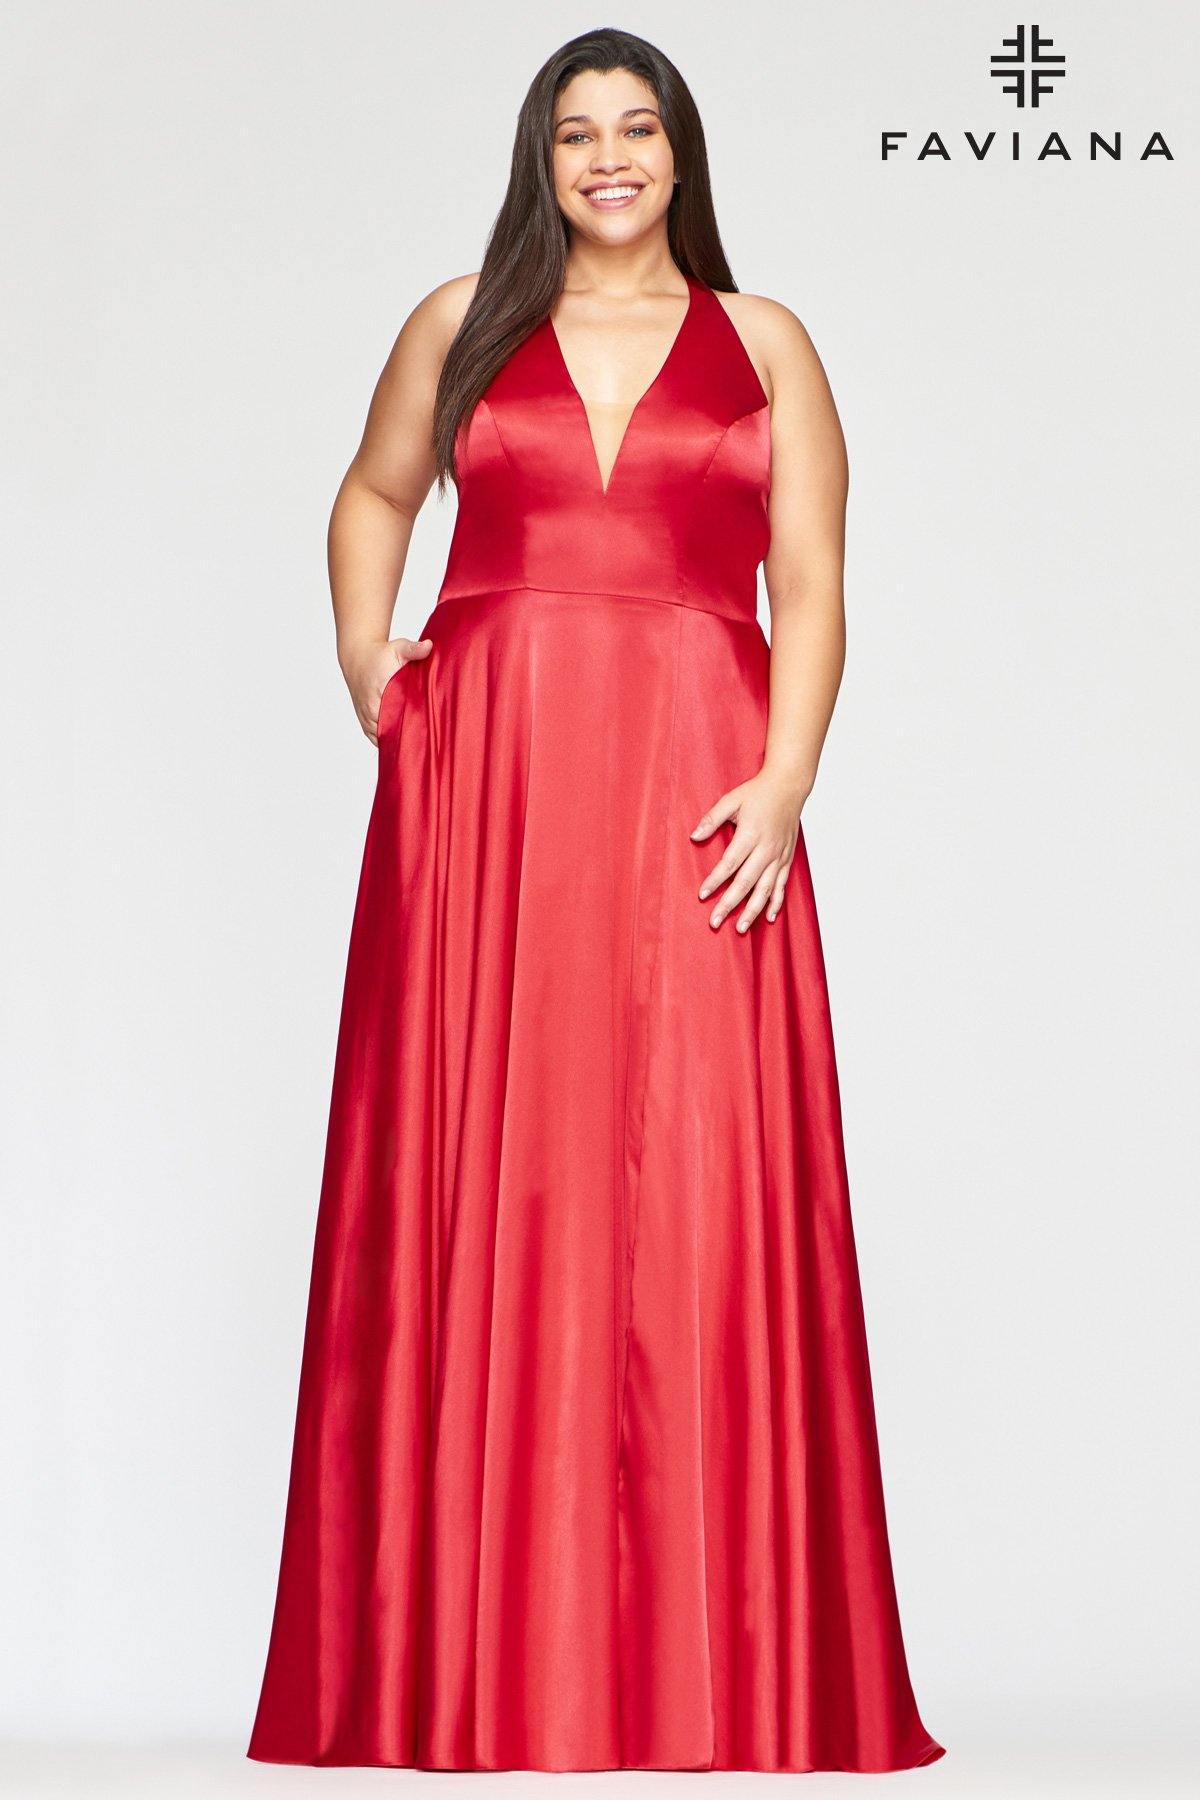 Faviana 9495 Long Formal Halter Plus Size Prom Gown - The Dress Outlet Faviana